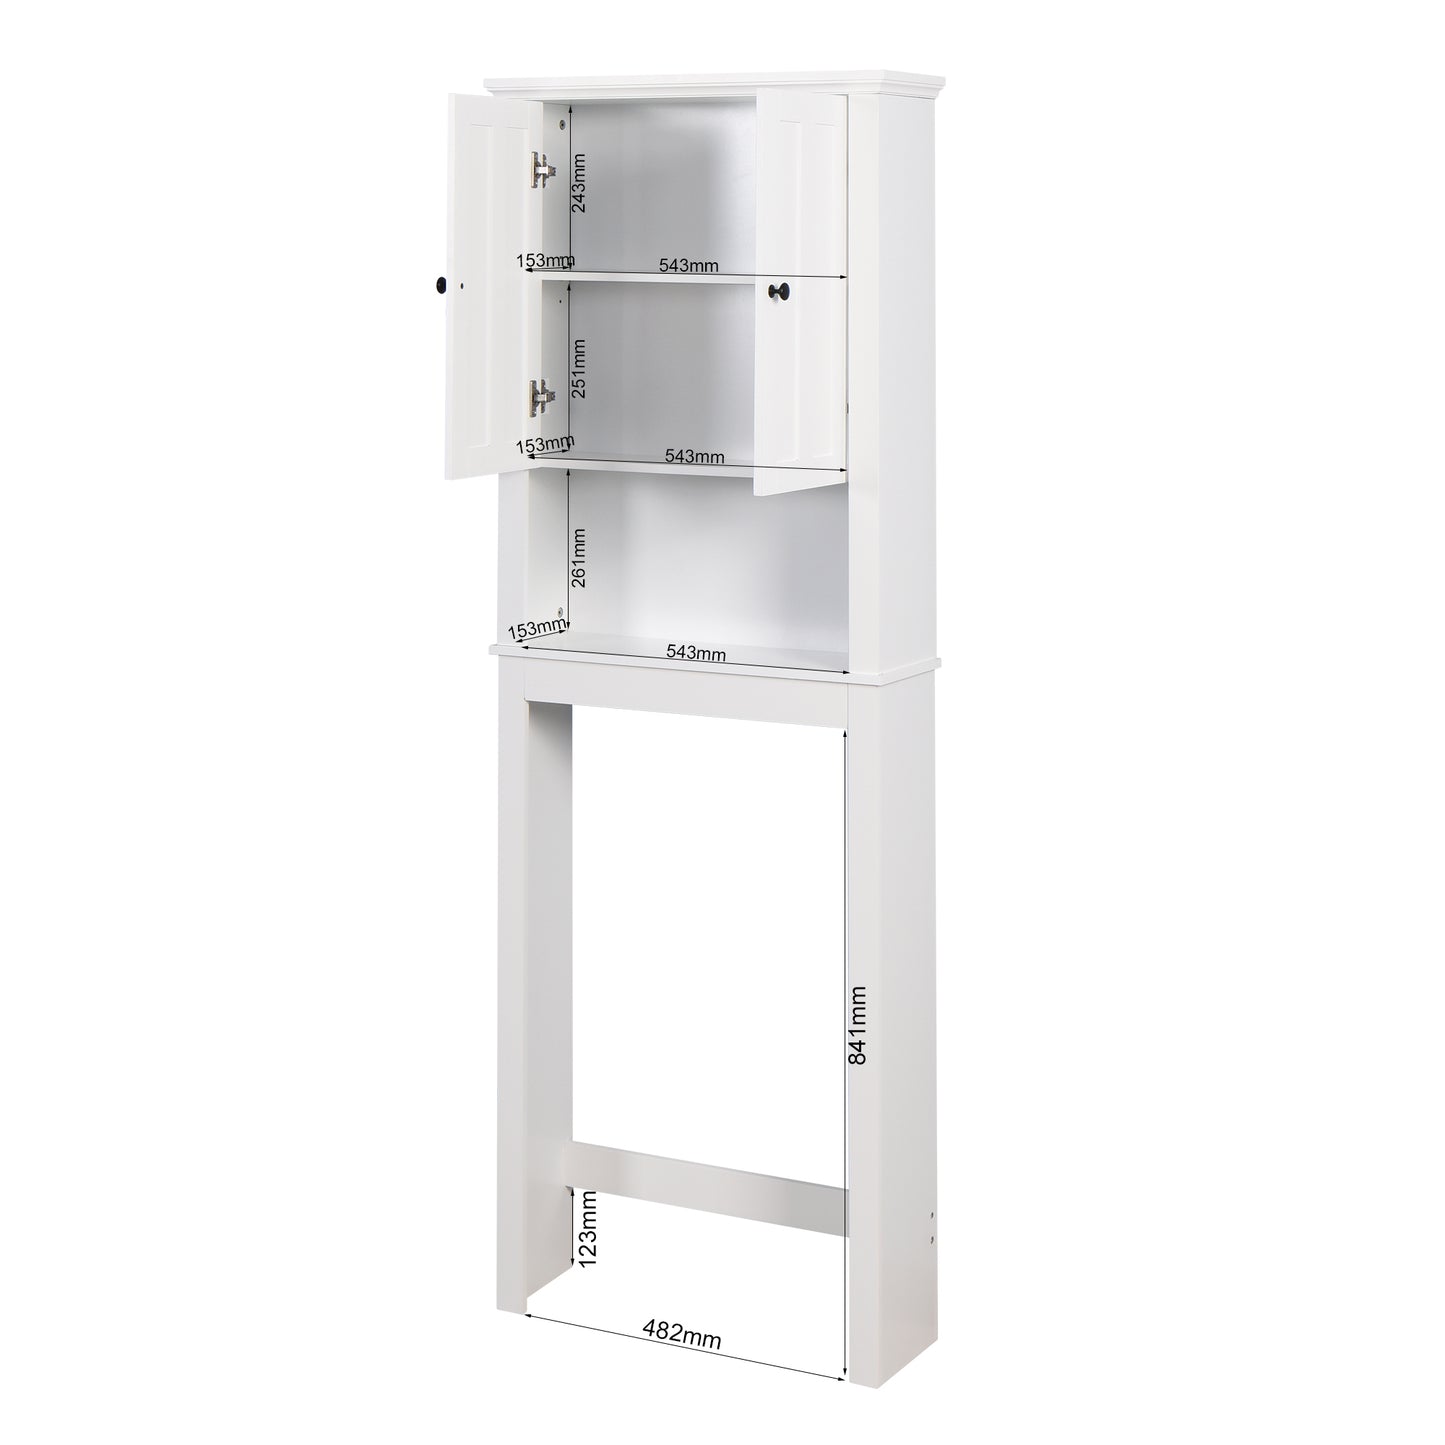 Bathroom Wooden Storage Cabinet Over-The-Toilet Space Saver with a Adjustable Shelf 23.62x7.72x67.32 inch